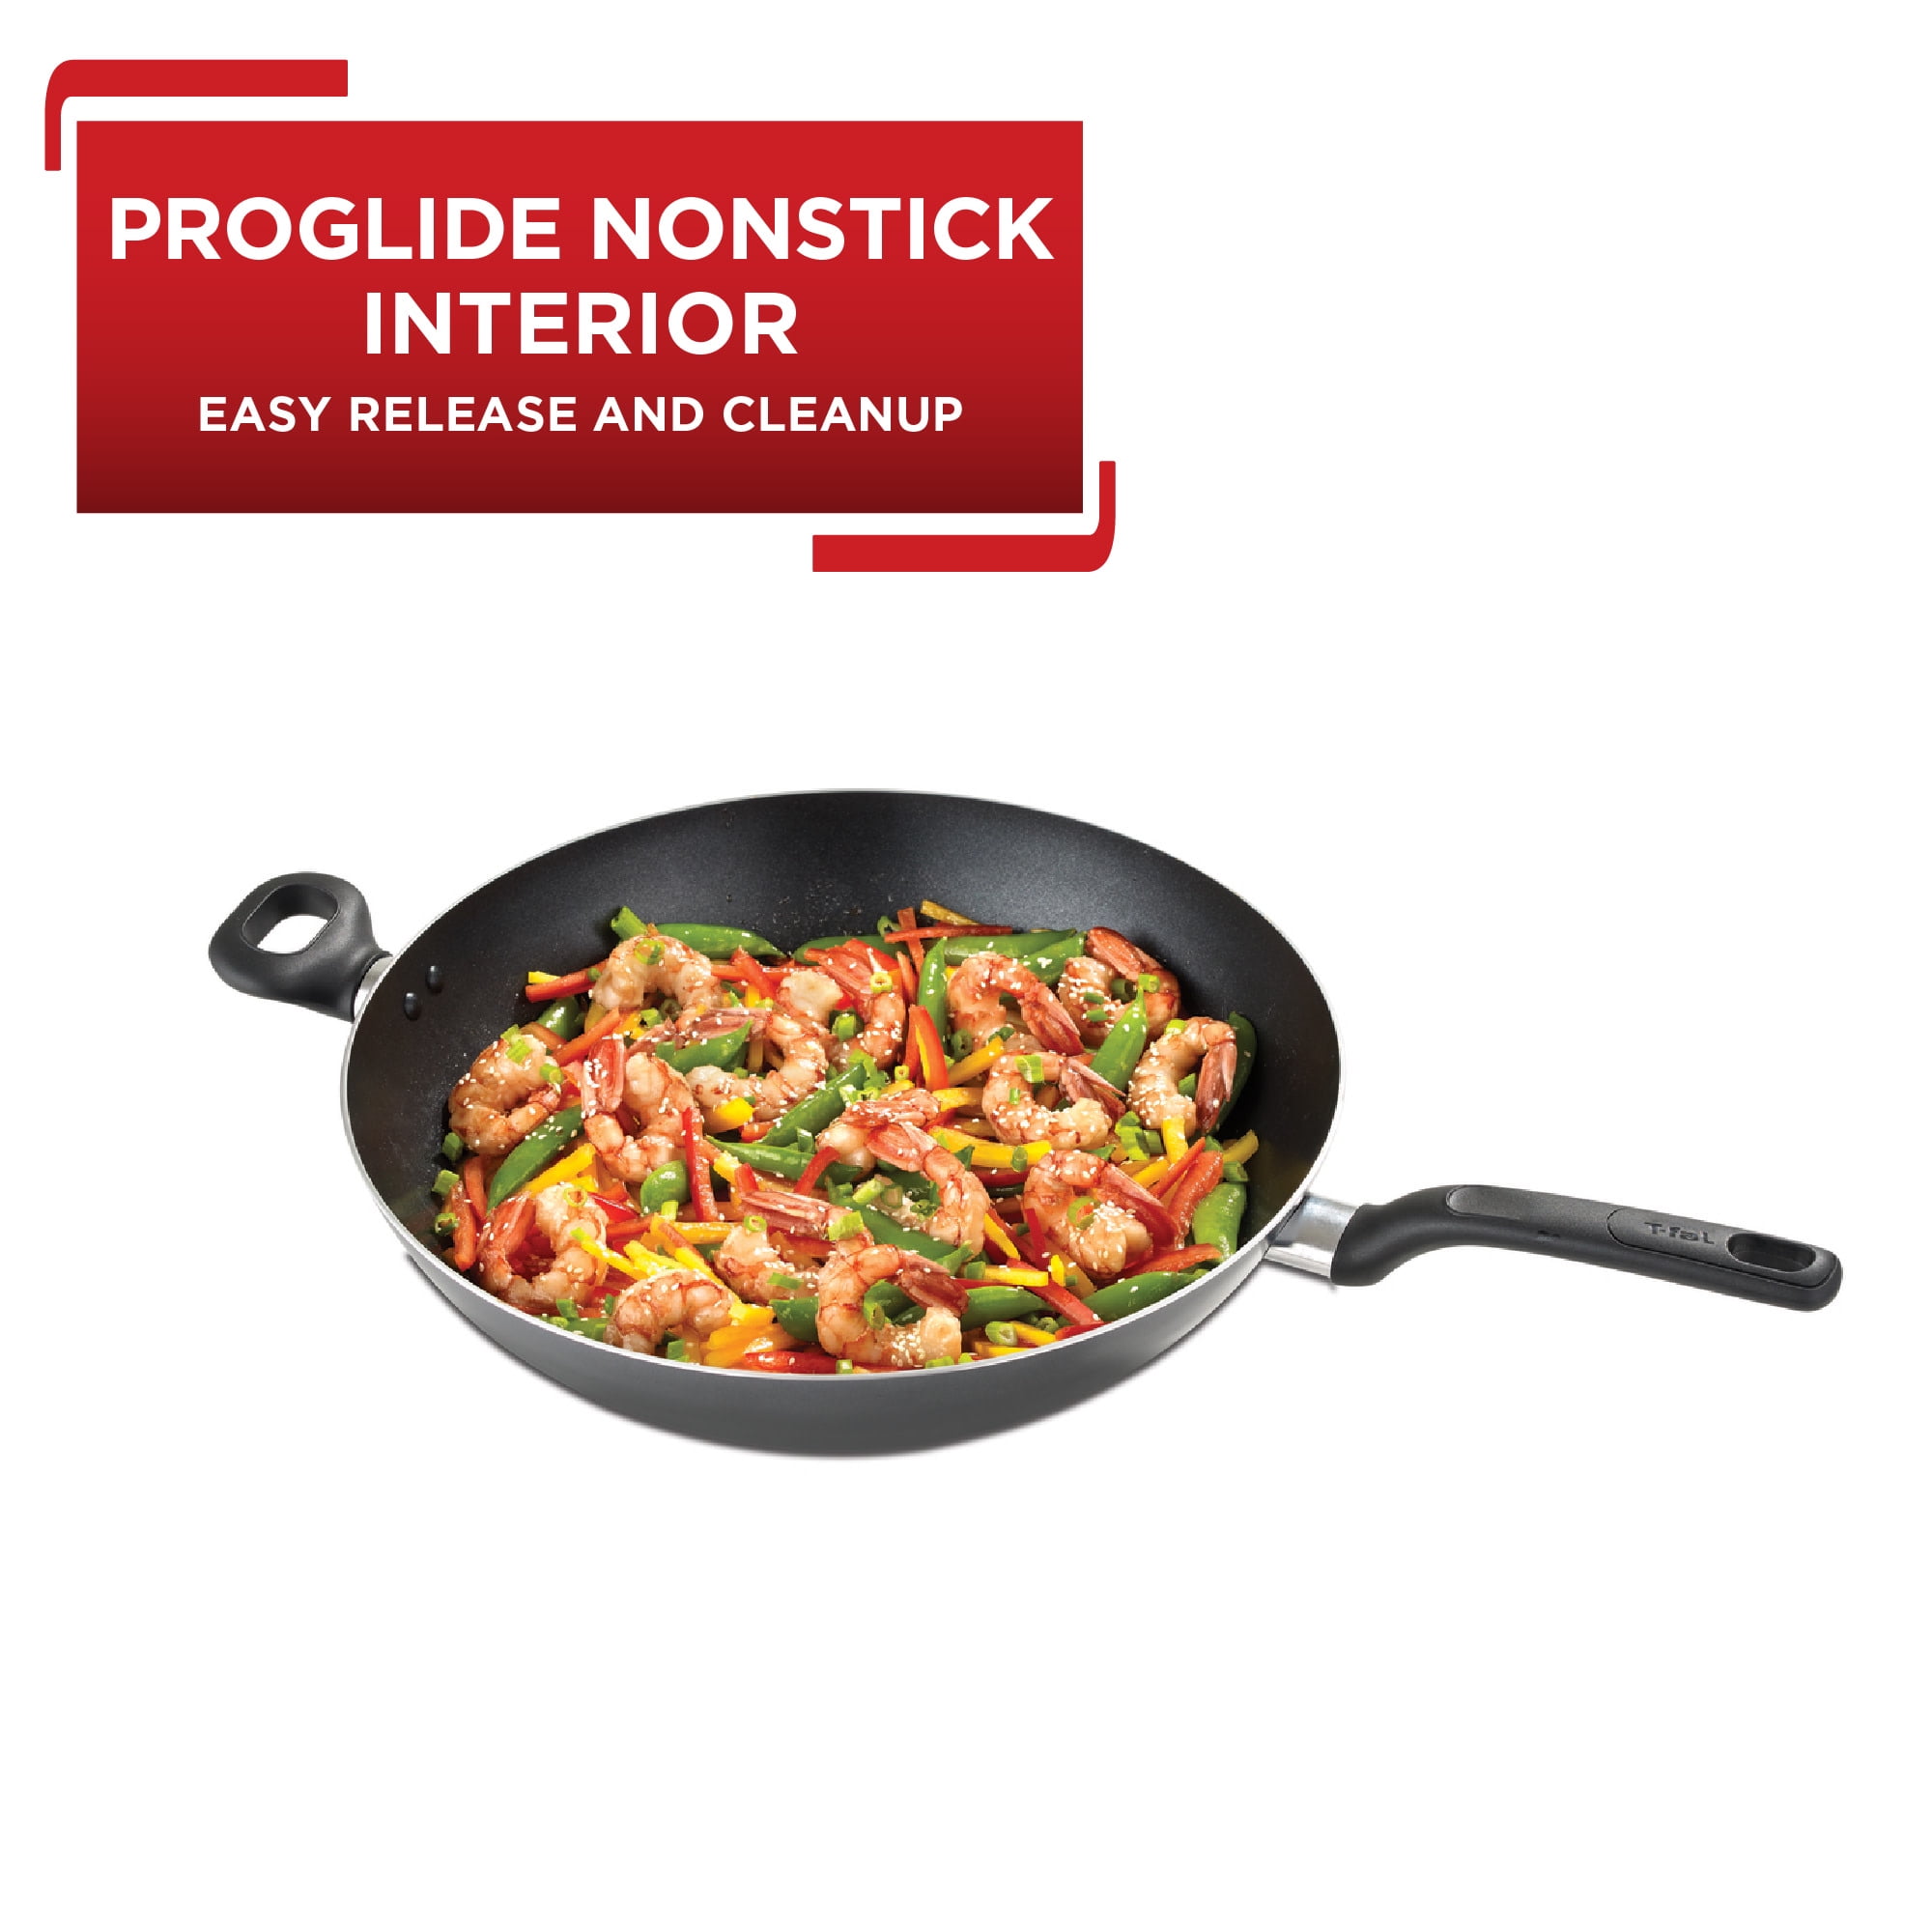 T-fal Easy Care Nonstick Wok, 14.25 inch, Grey 